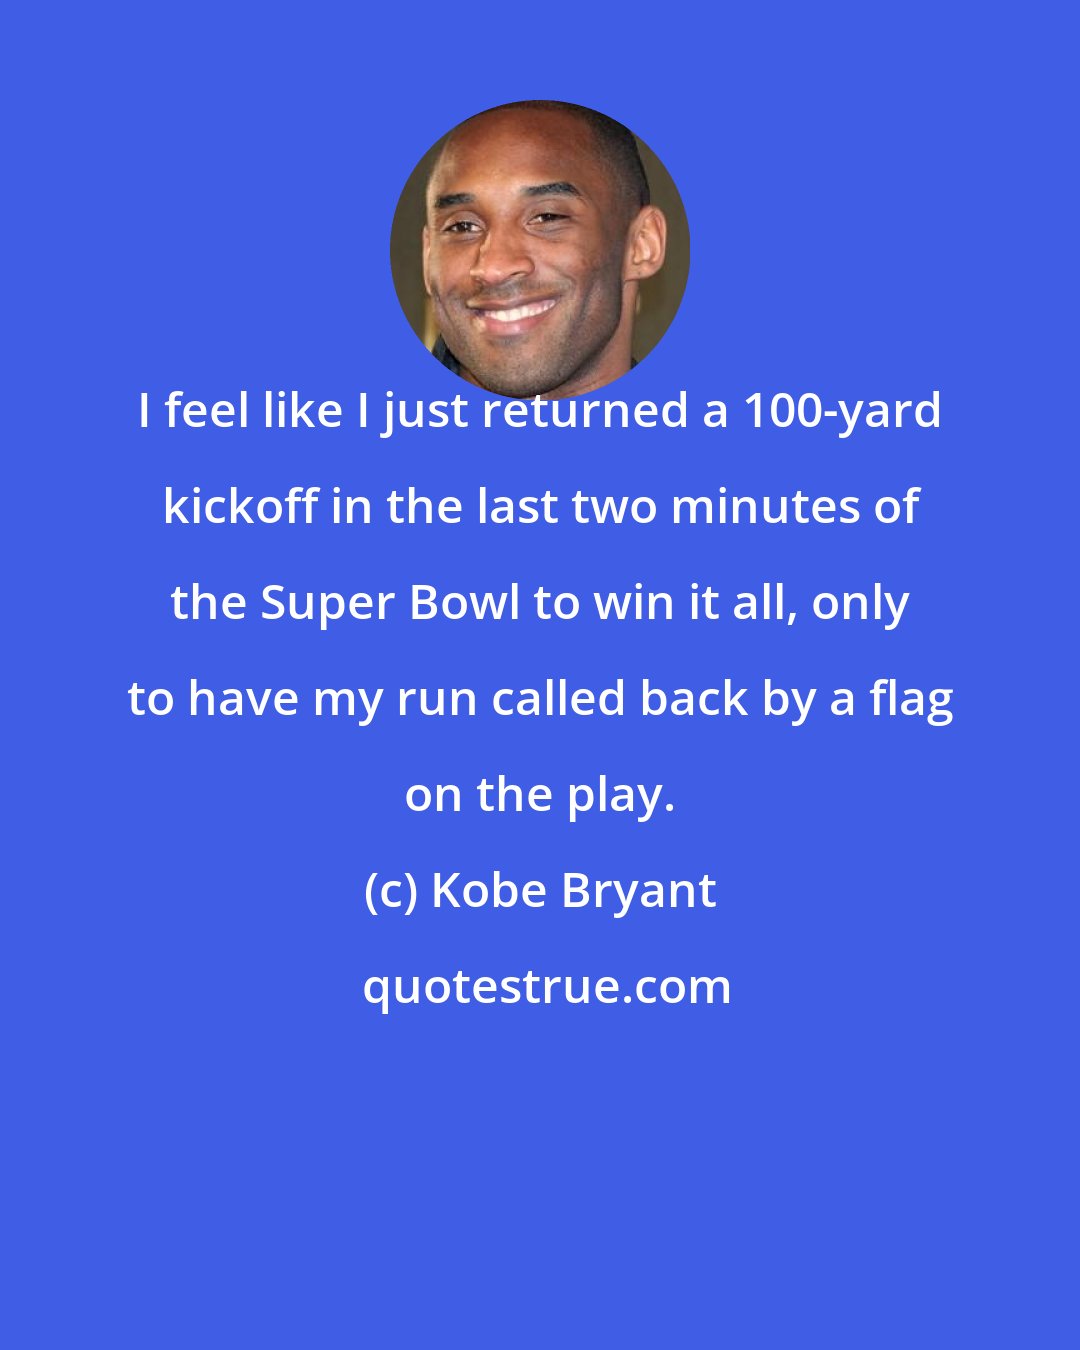 Kobe Bryant: I feel like I just returned a 100-yard kickoff in the last two minutes of the Super Bowl to win it all, only to have my run called back by a flag on the play.